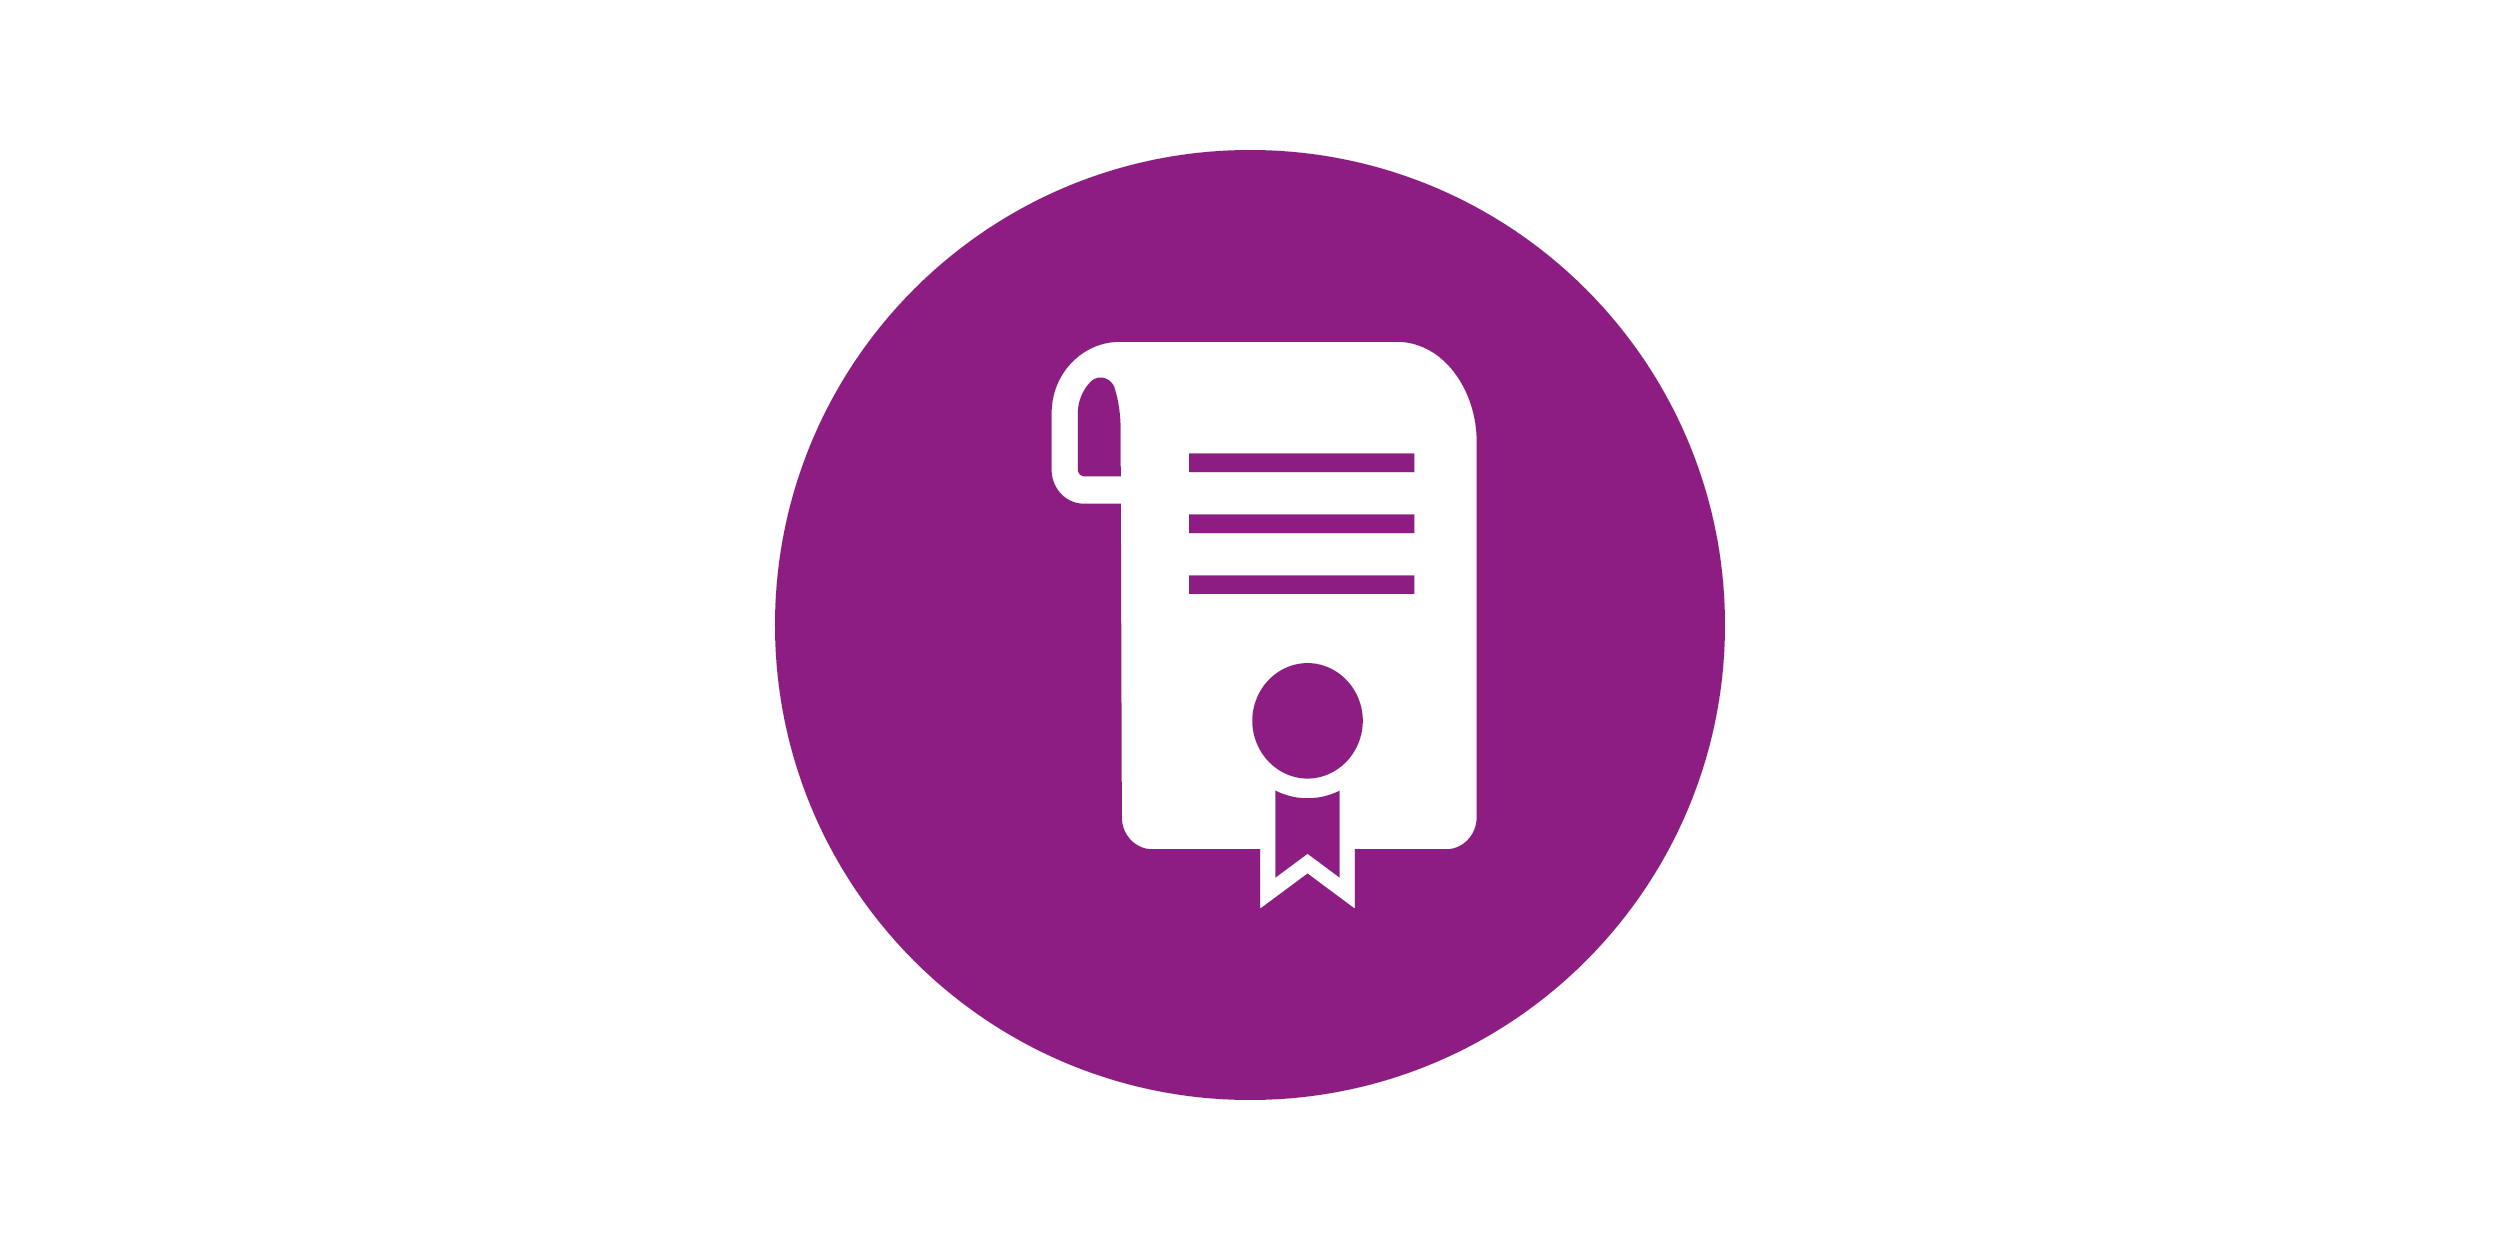 Icon of a white legal document with seal on a purple background